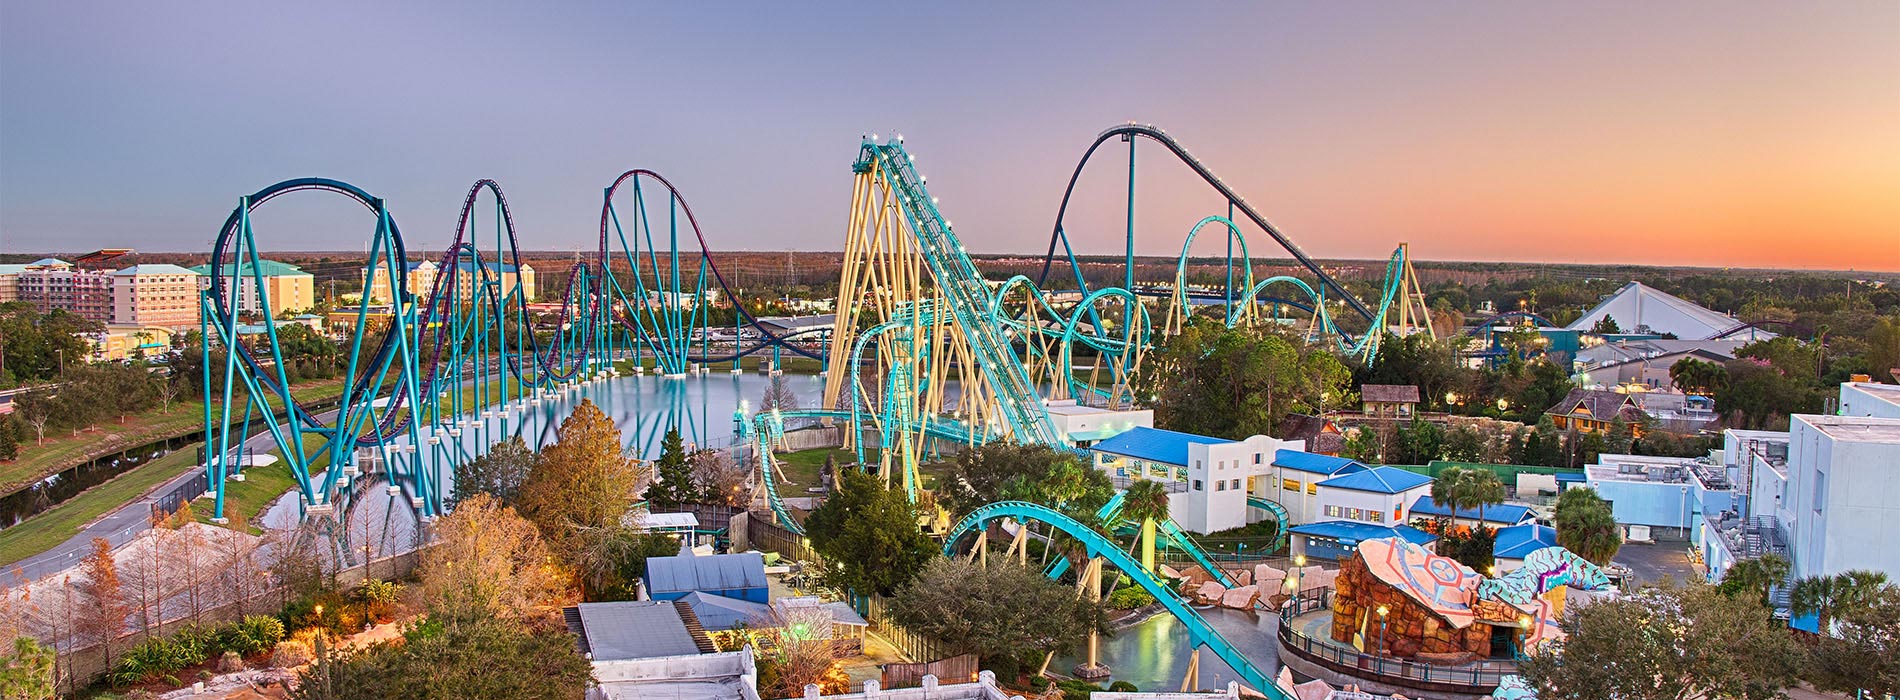 SeaWorld Orlando Challenges Guests to Ride All Roller Coasters ThrillGeek